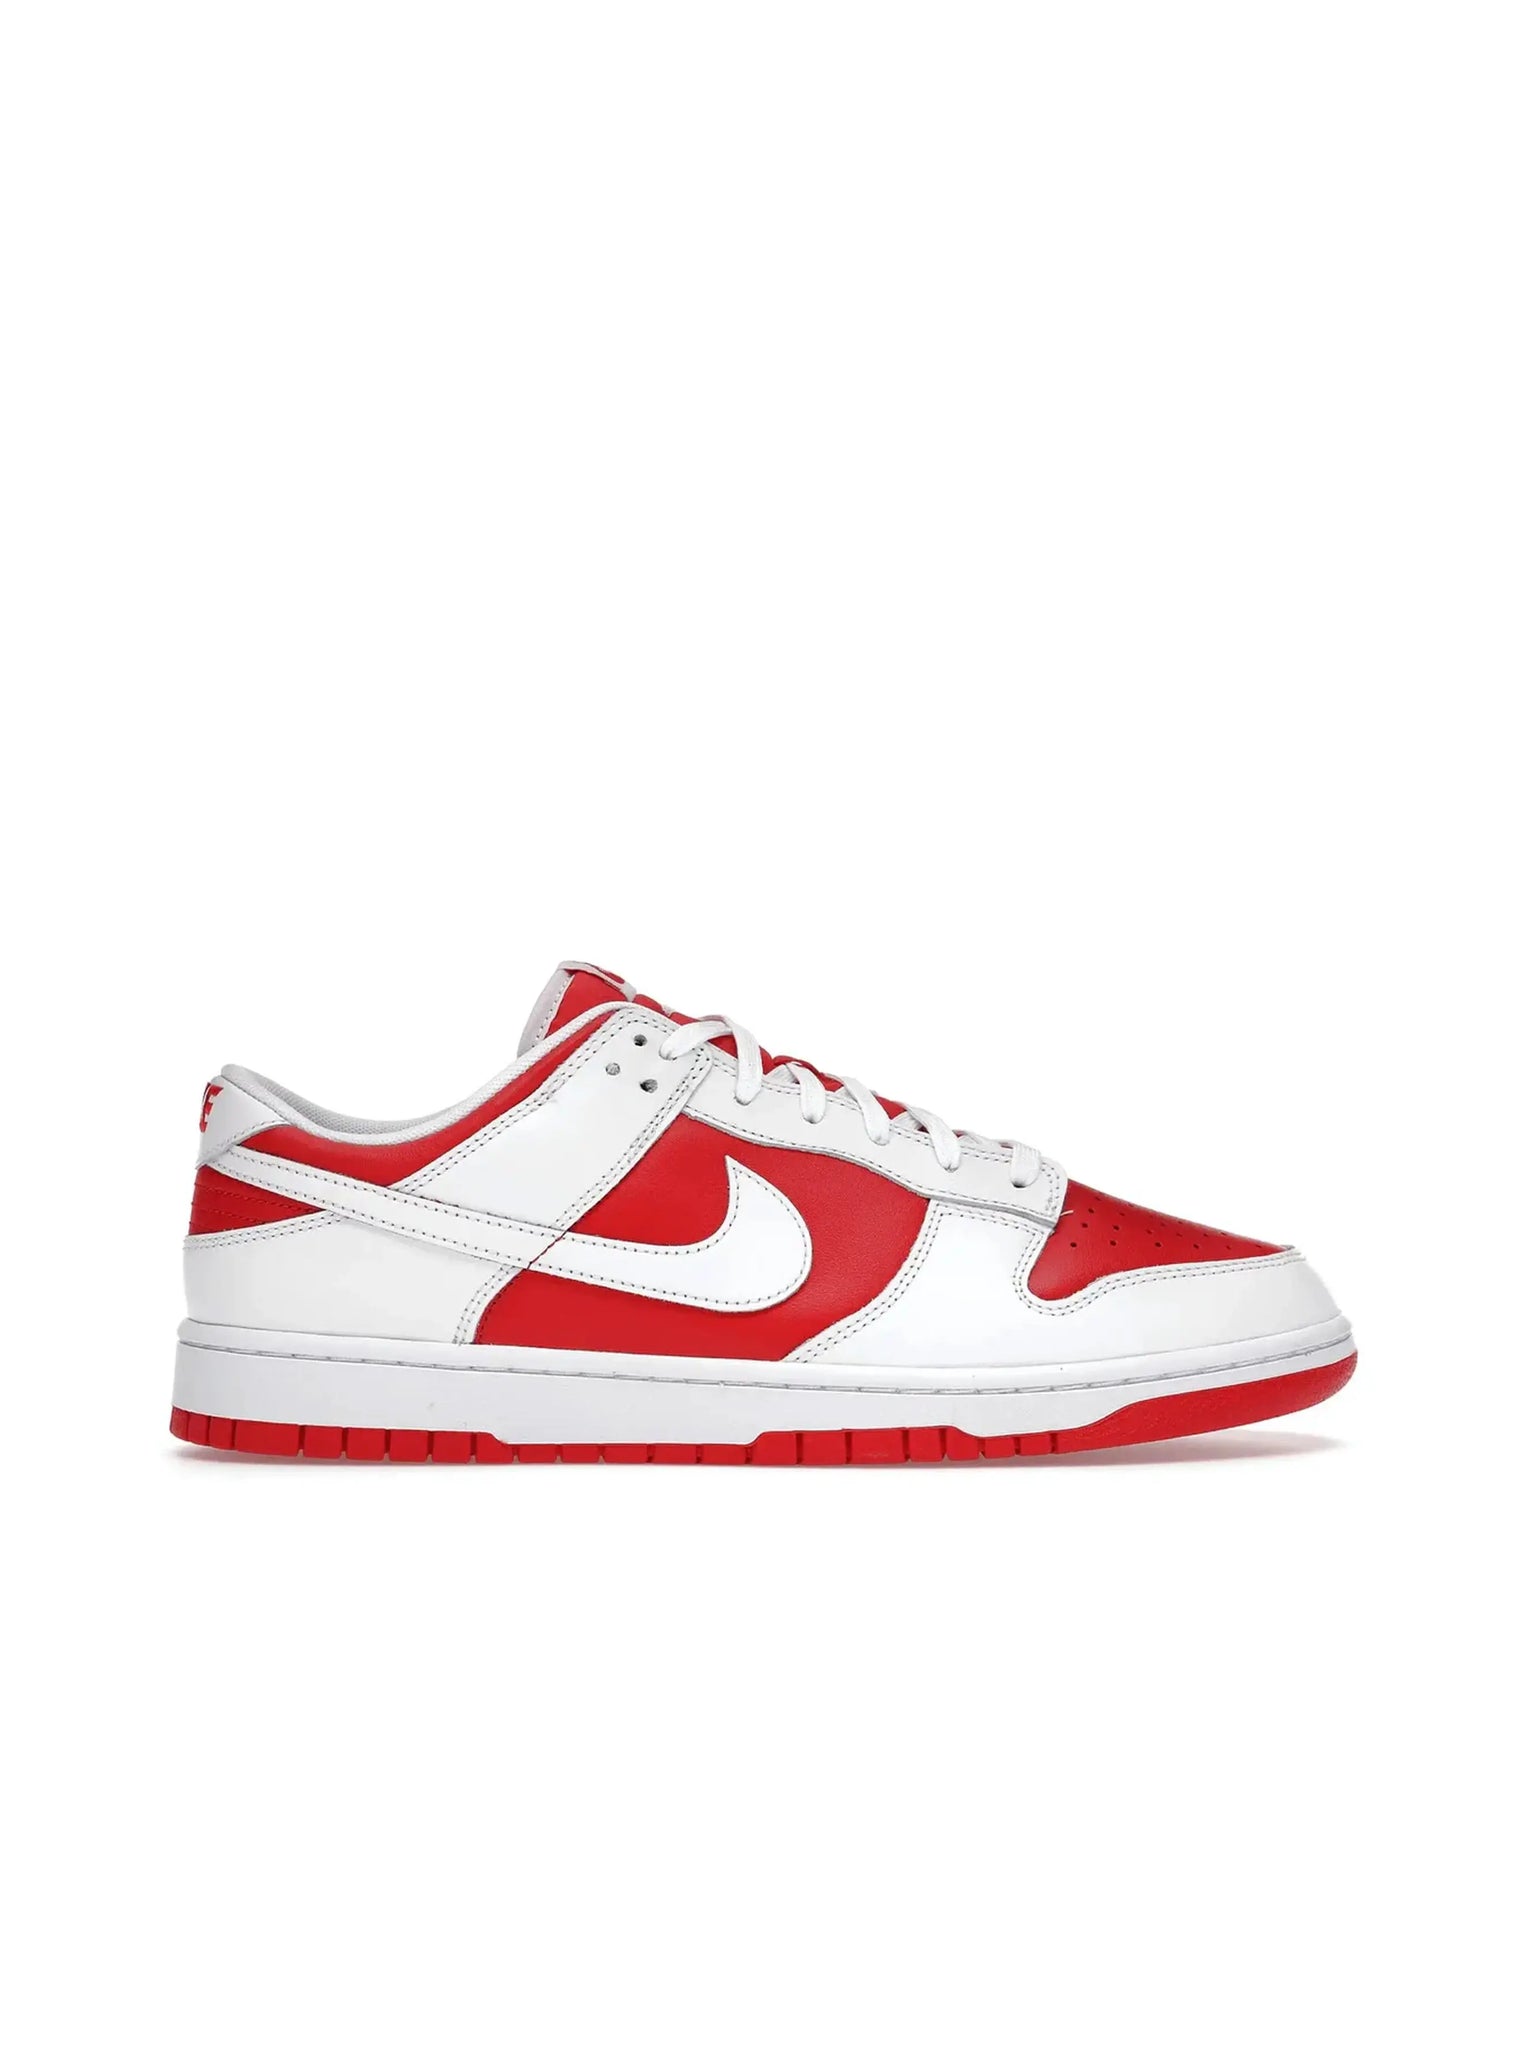 Nike Dunk Low Championship Red in Melbourne, Australia - Prior